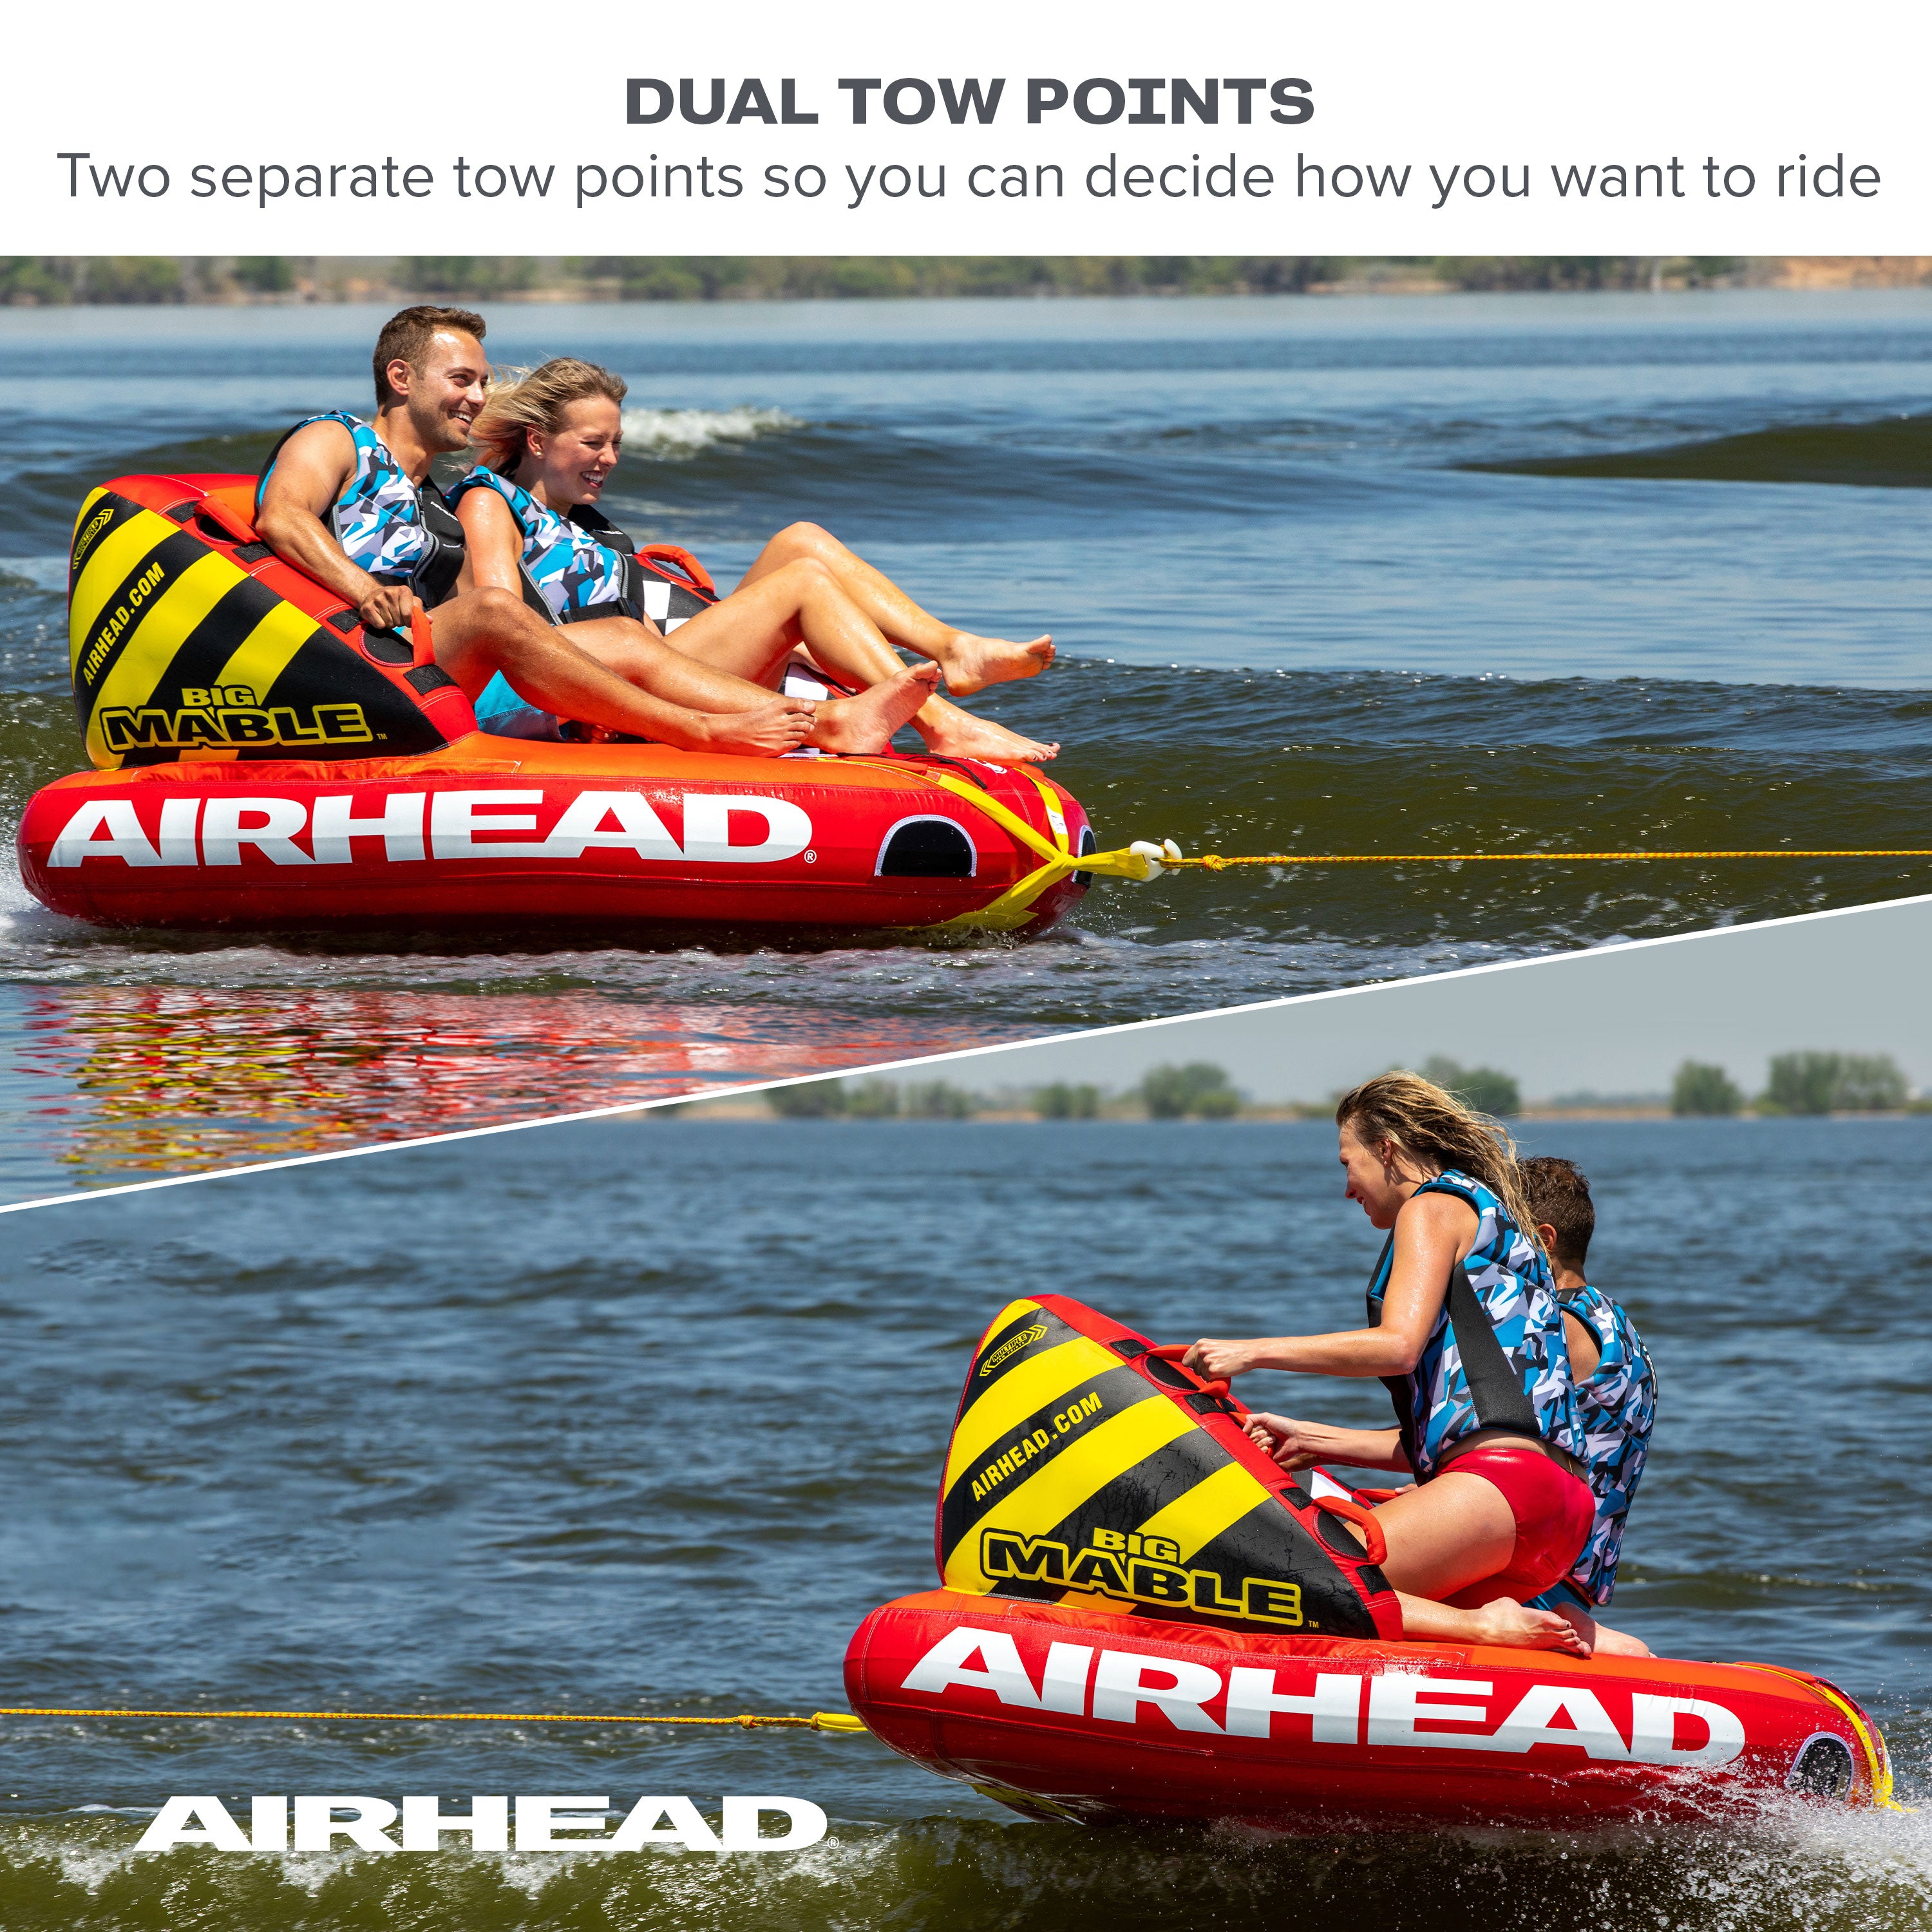 How To Select The Right Rope For Tubing & Boating 